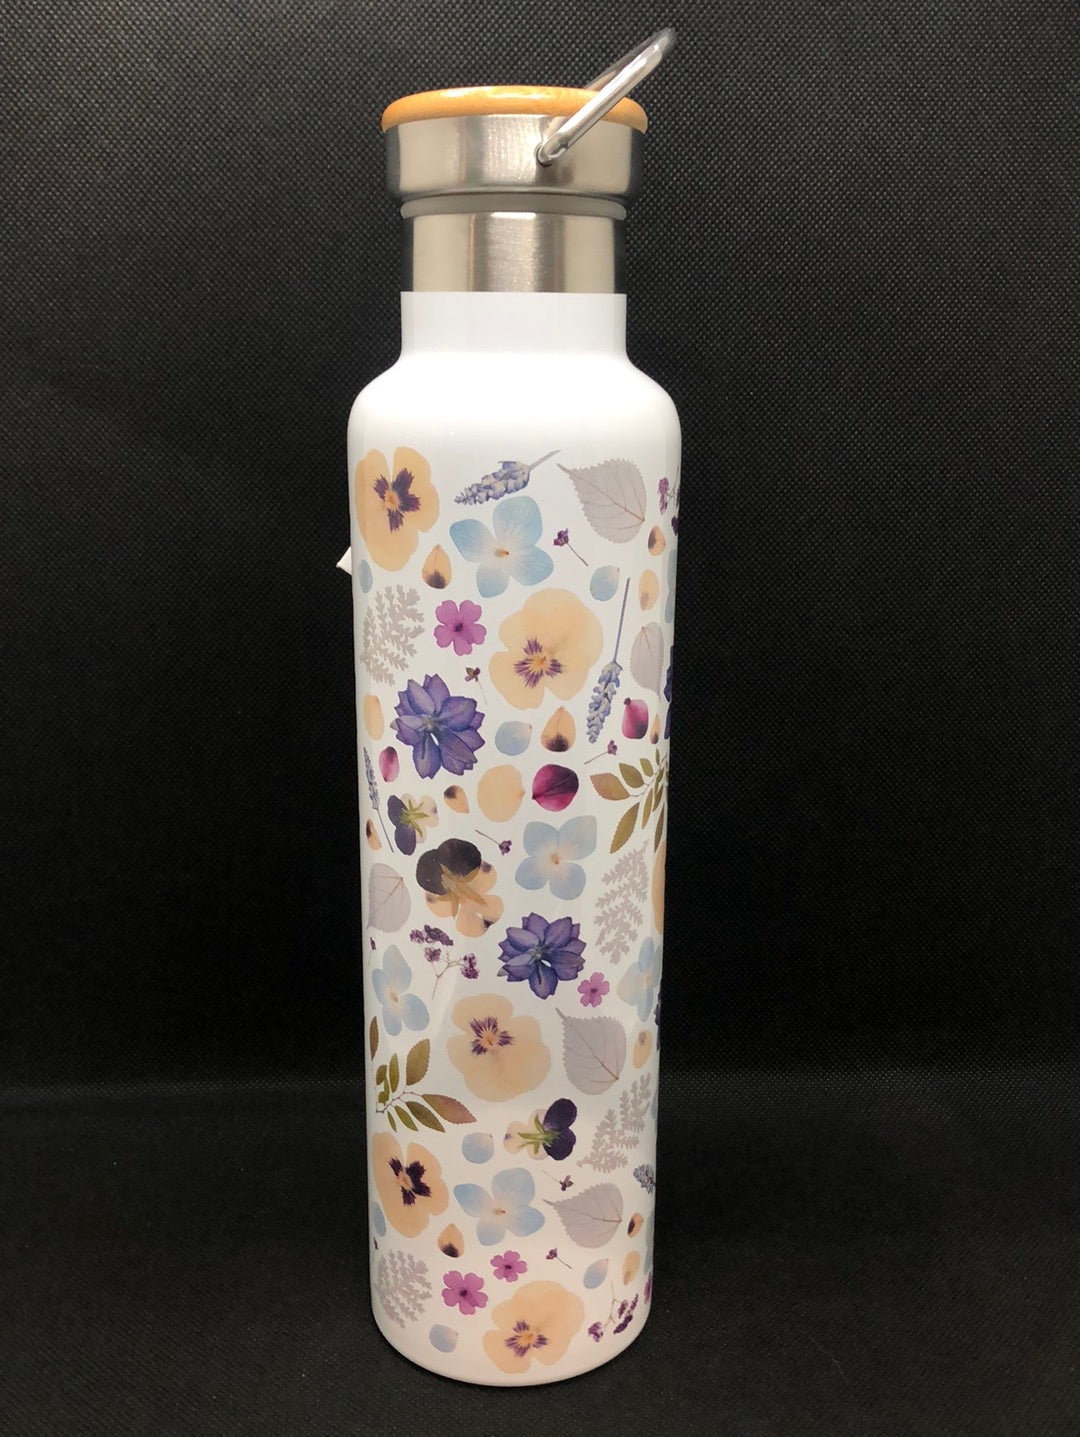 water bottle with stainless steel and insulated -flowers design - full view 2